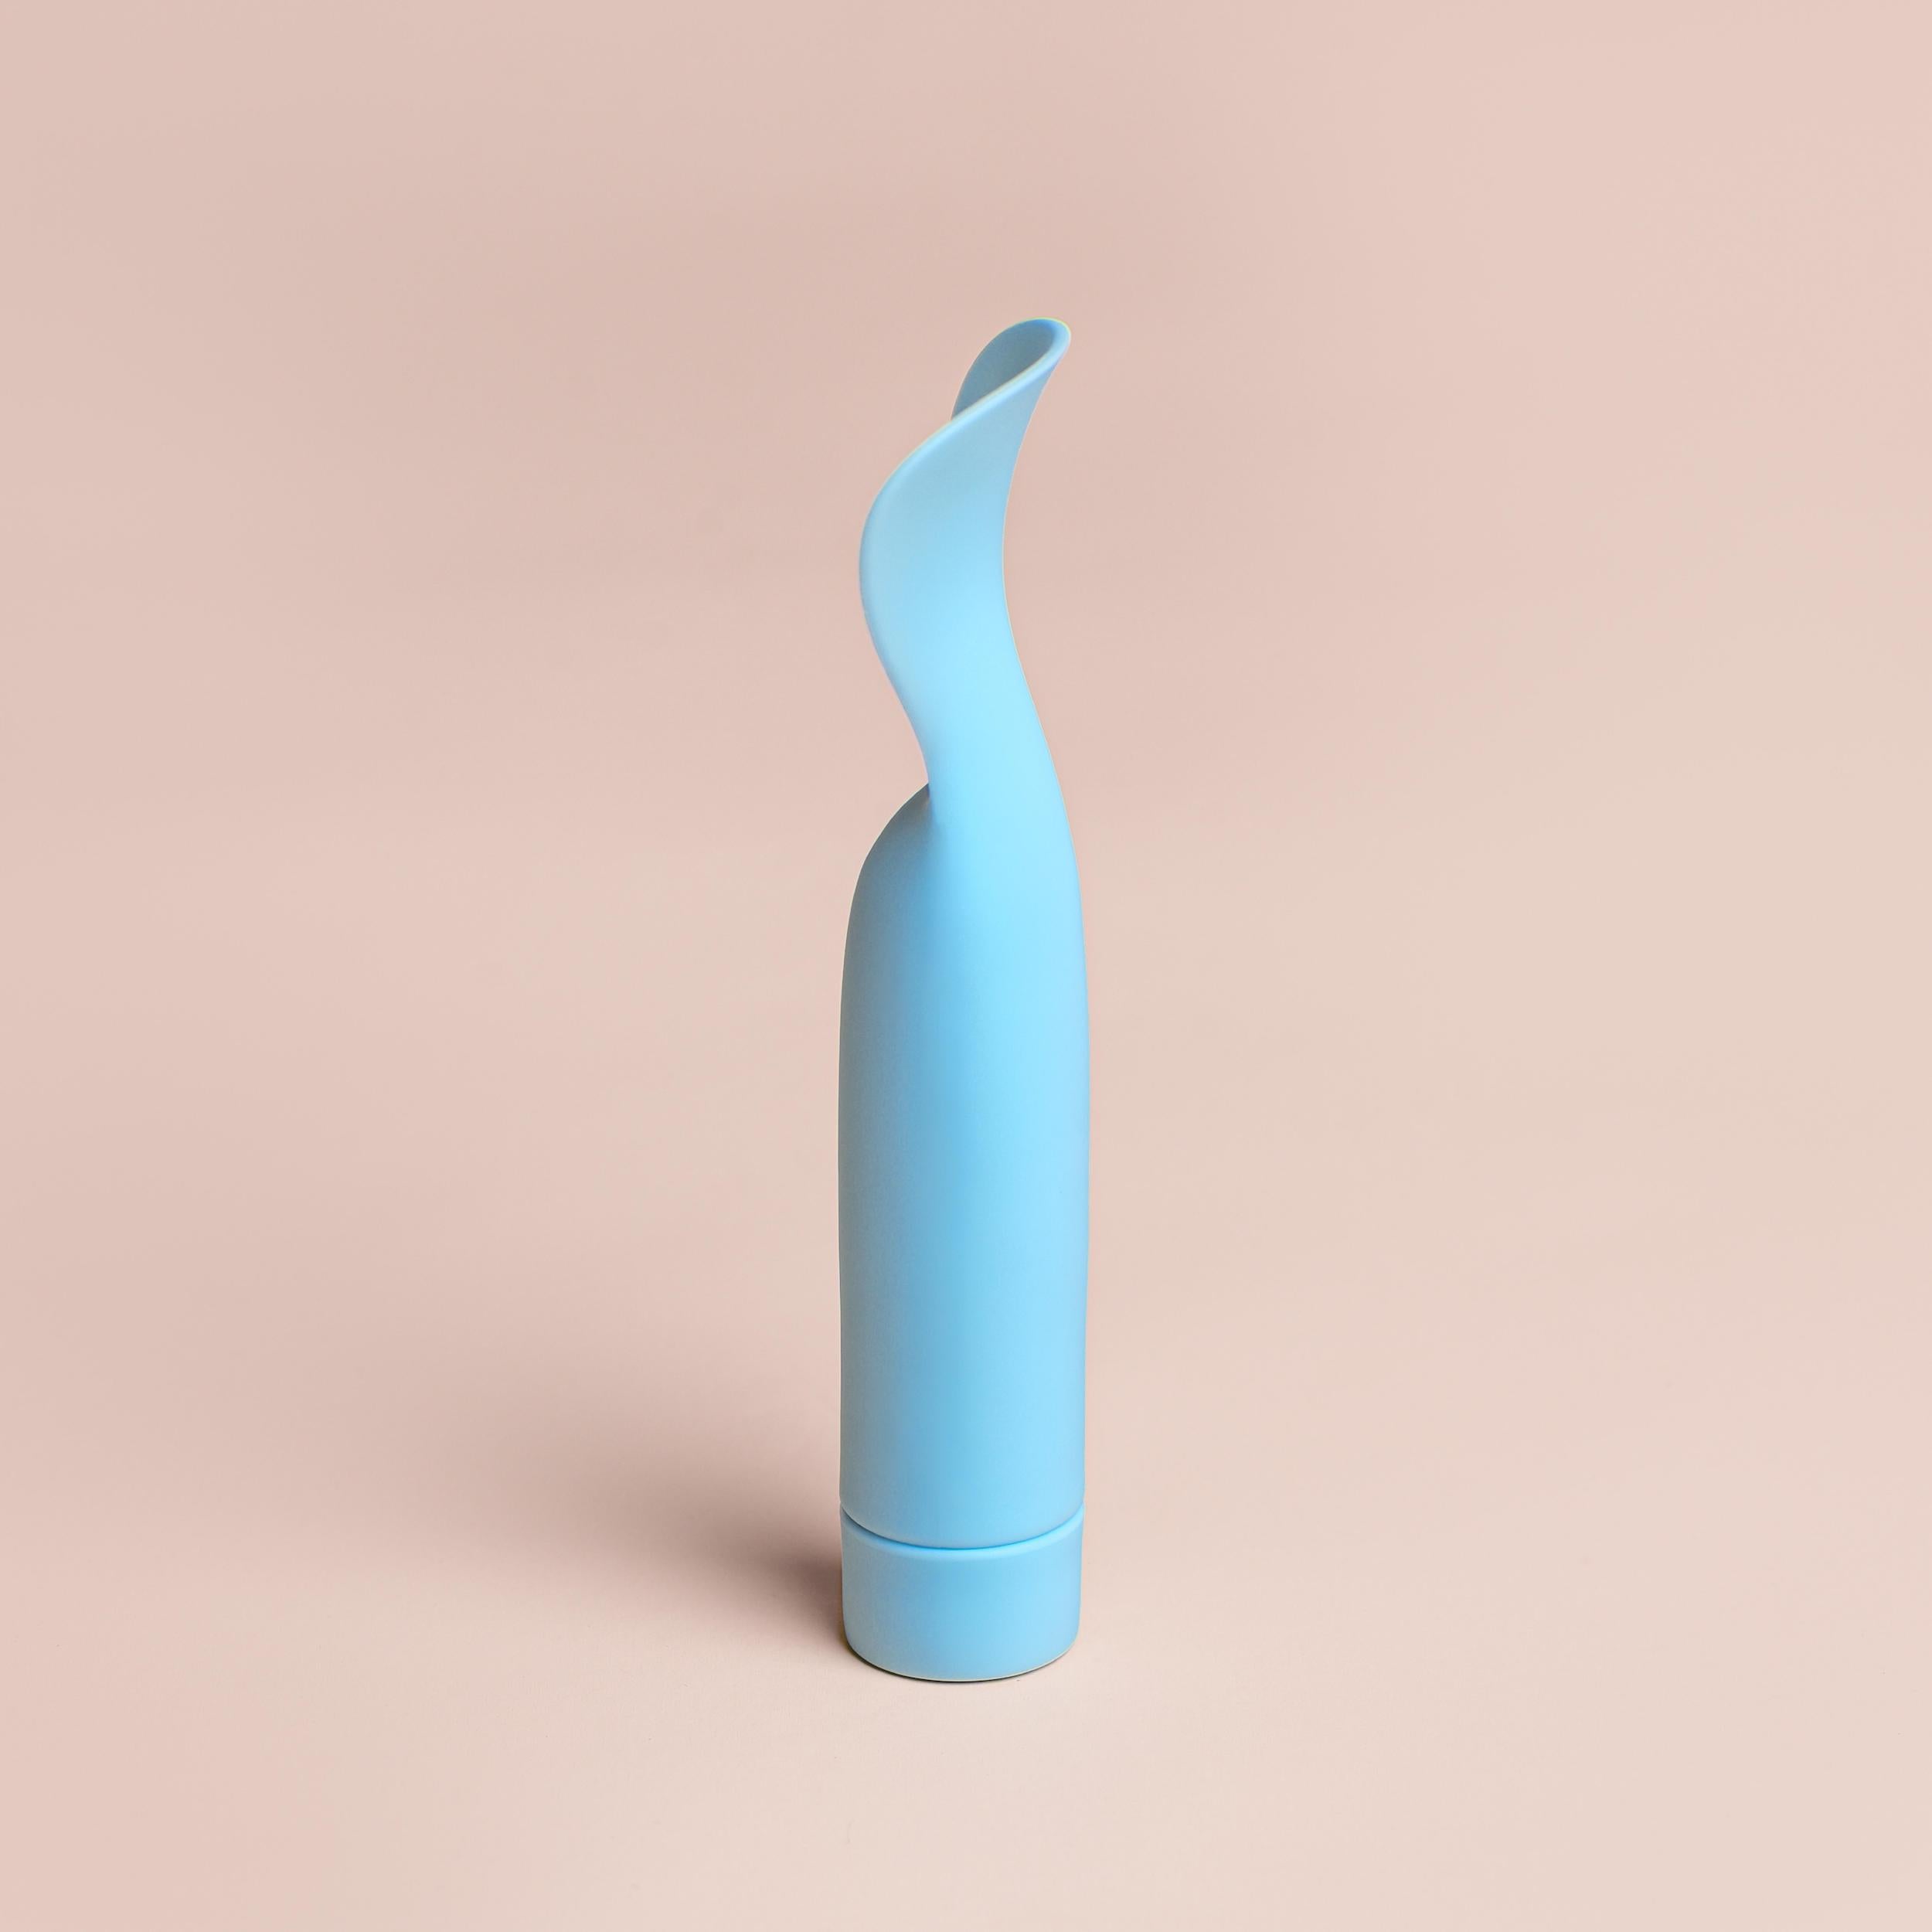 The French Lover - Super Soft Tongue Vibrator - Storming Gravity